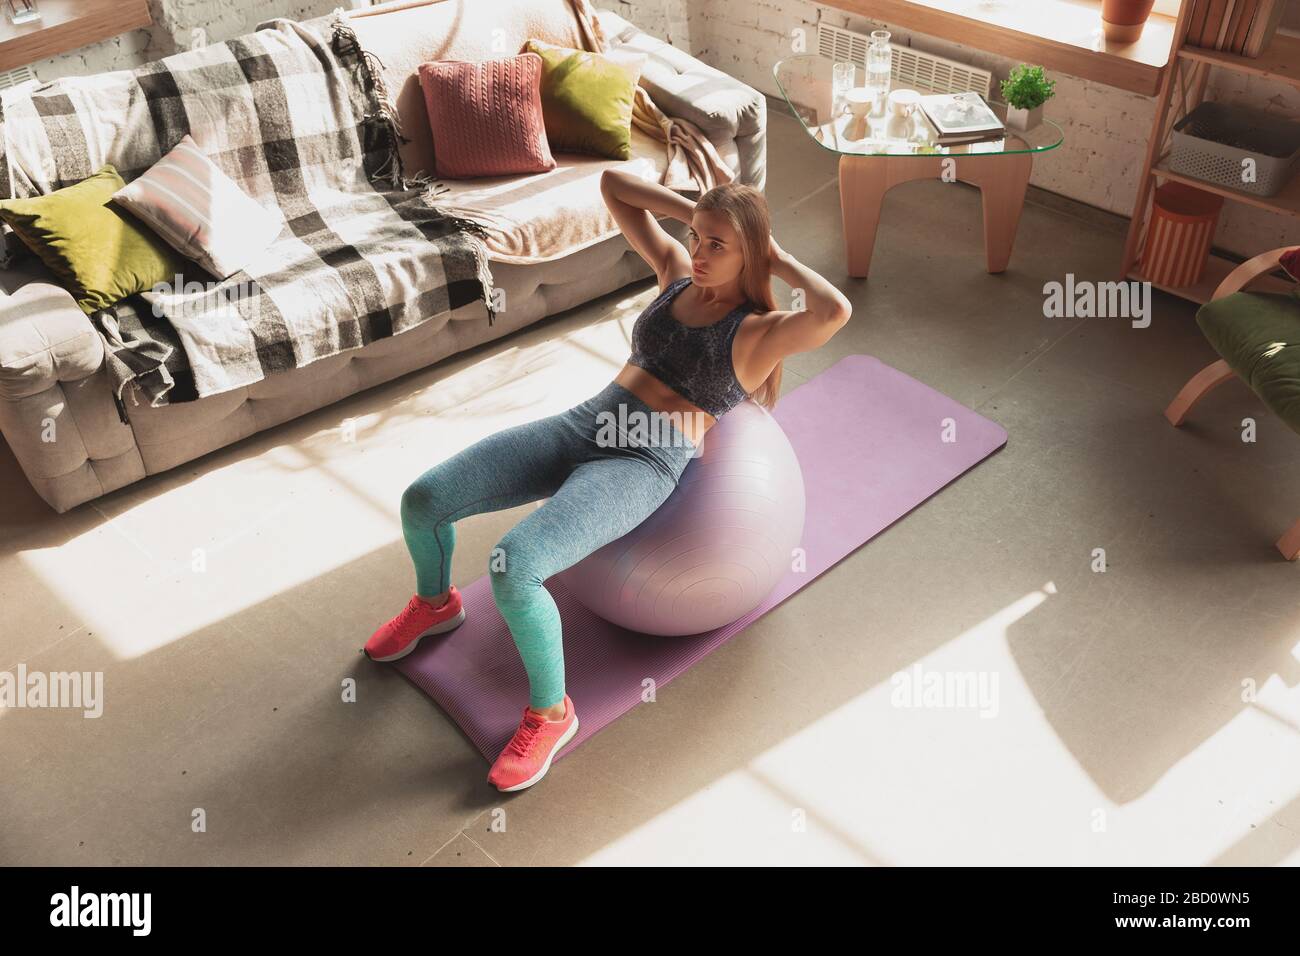 Young woman teaching at home online courses of fitness, aerobic, sporty lifestyle while quarantine. Getting active while isolated, wellness, movement concept. Exercises with fitball for lower body. Stock Photo